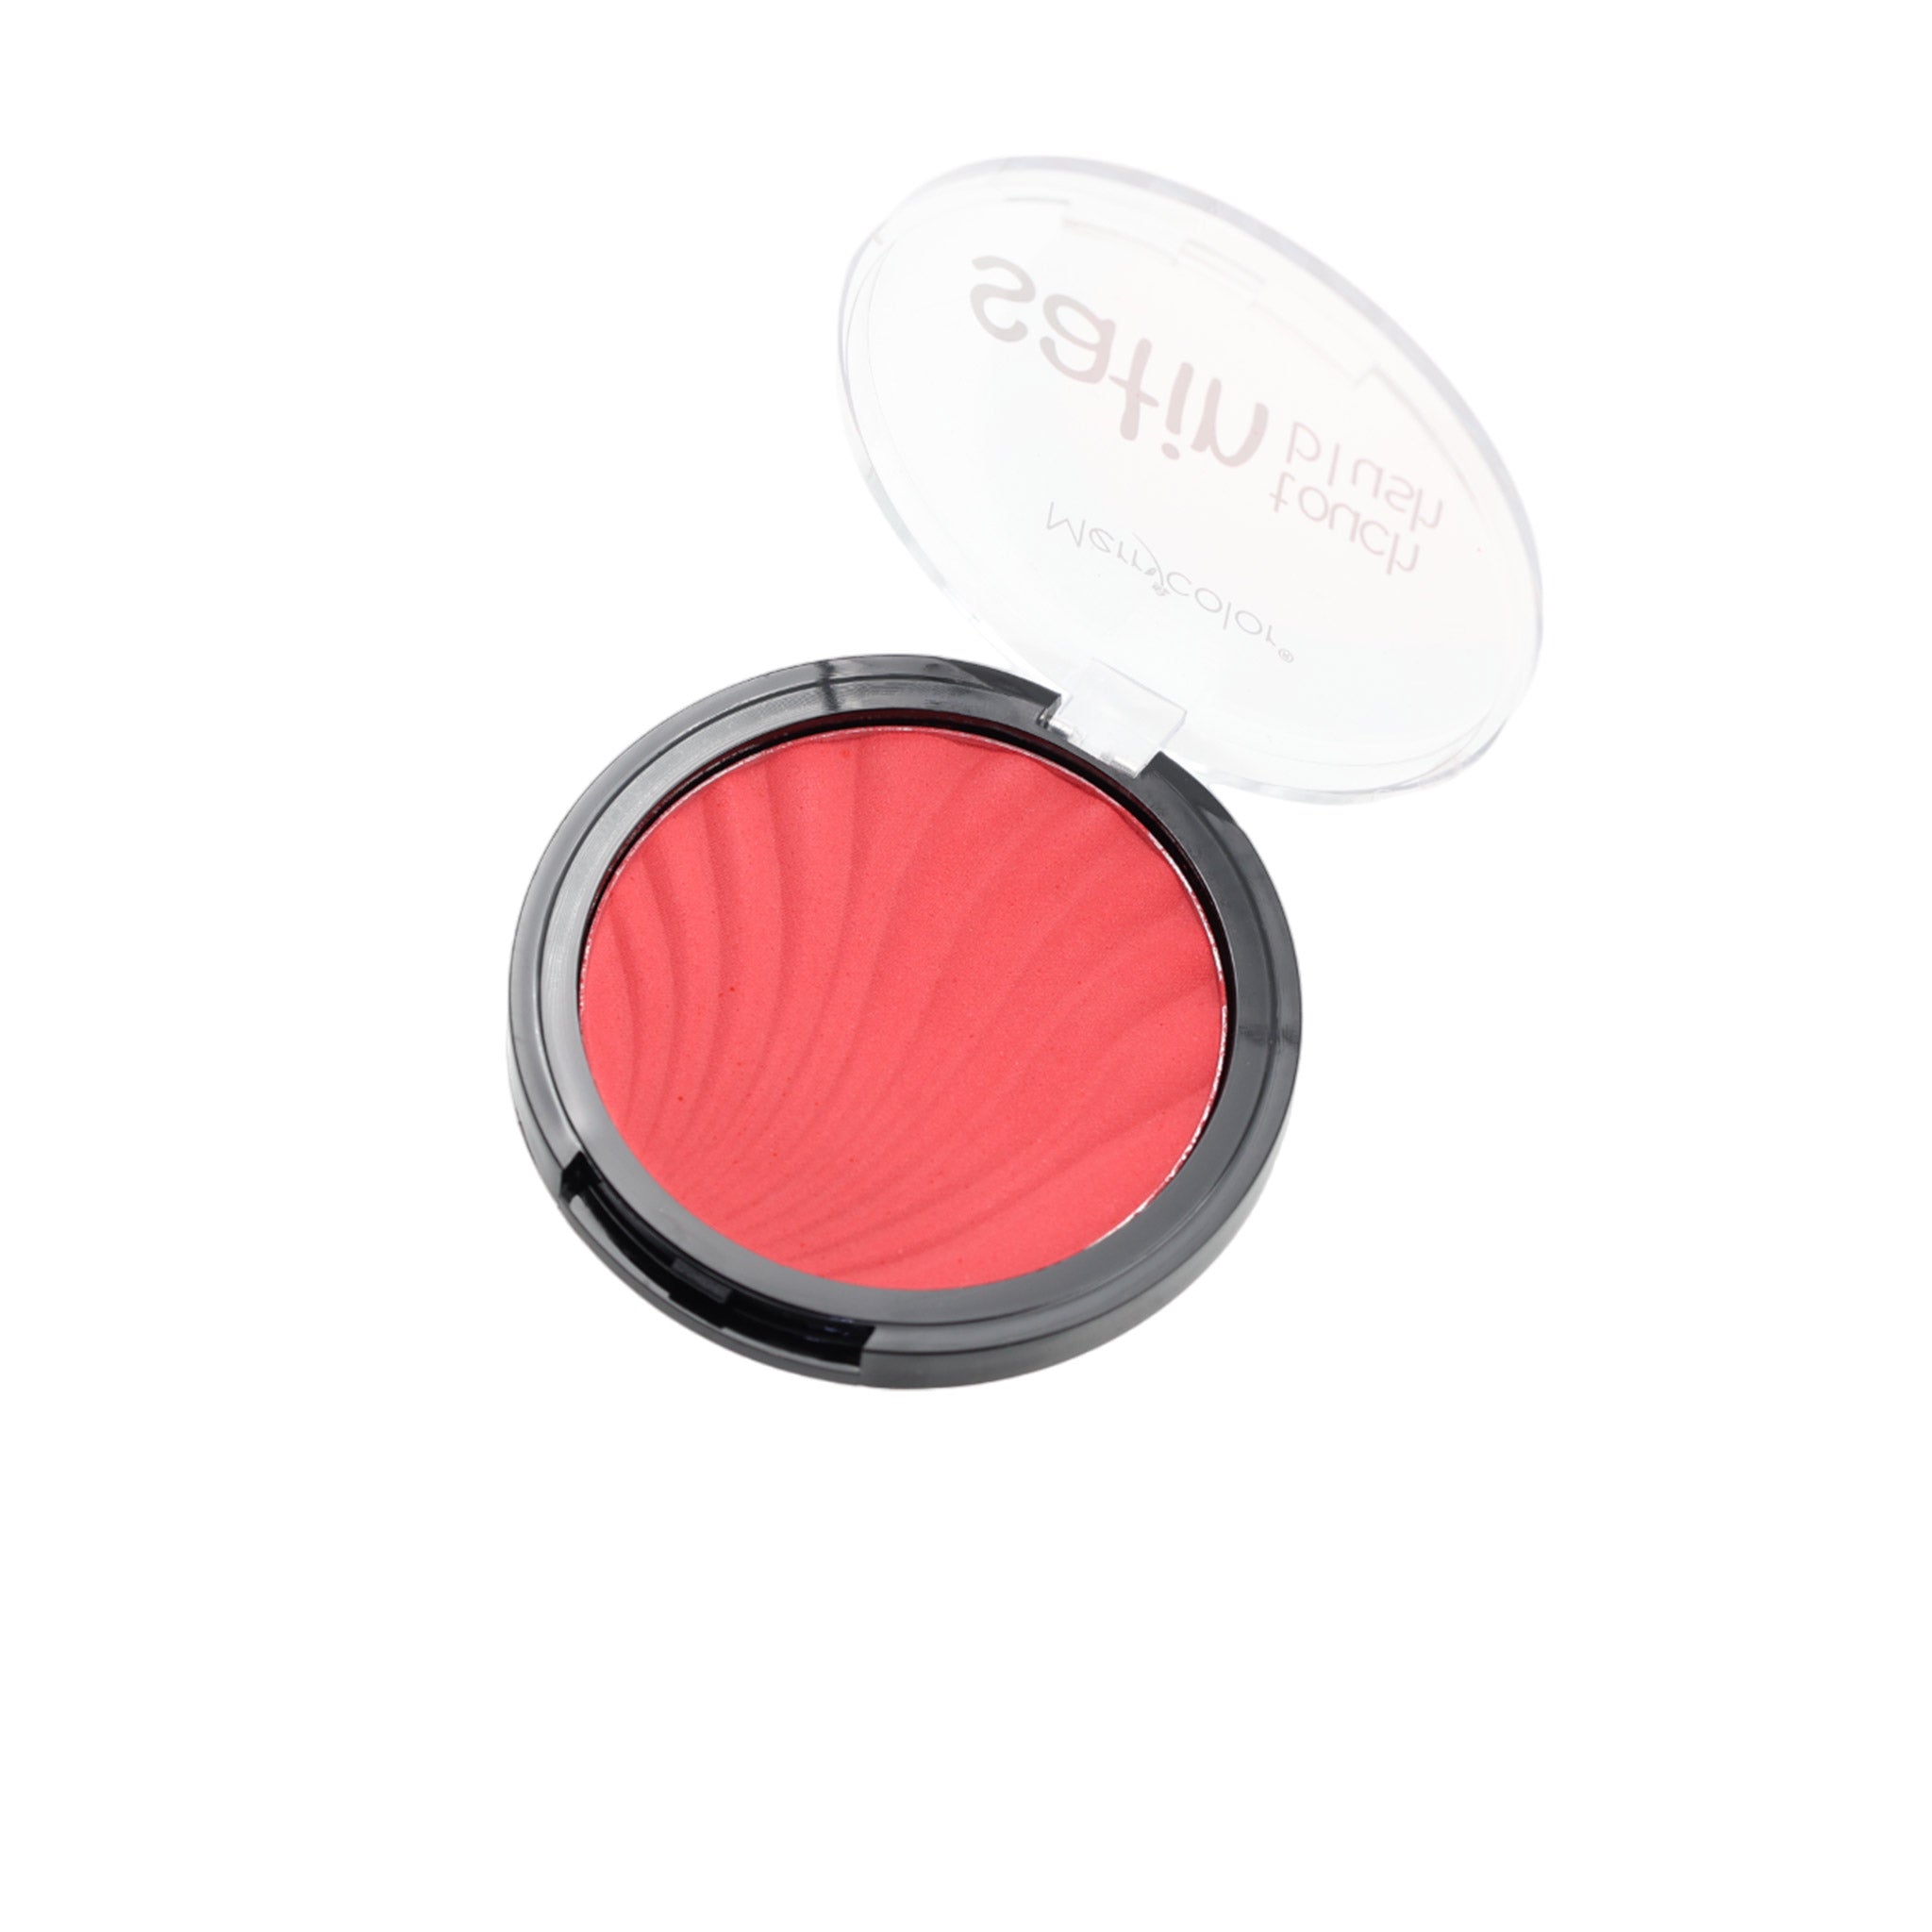 Merrycolor Satin Touch Blusher 01